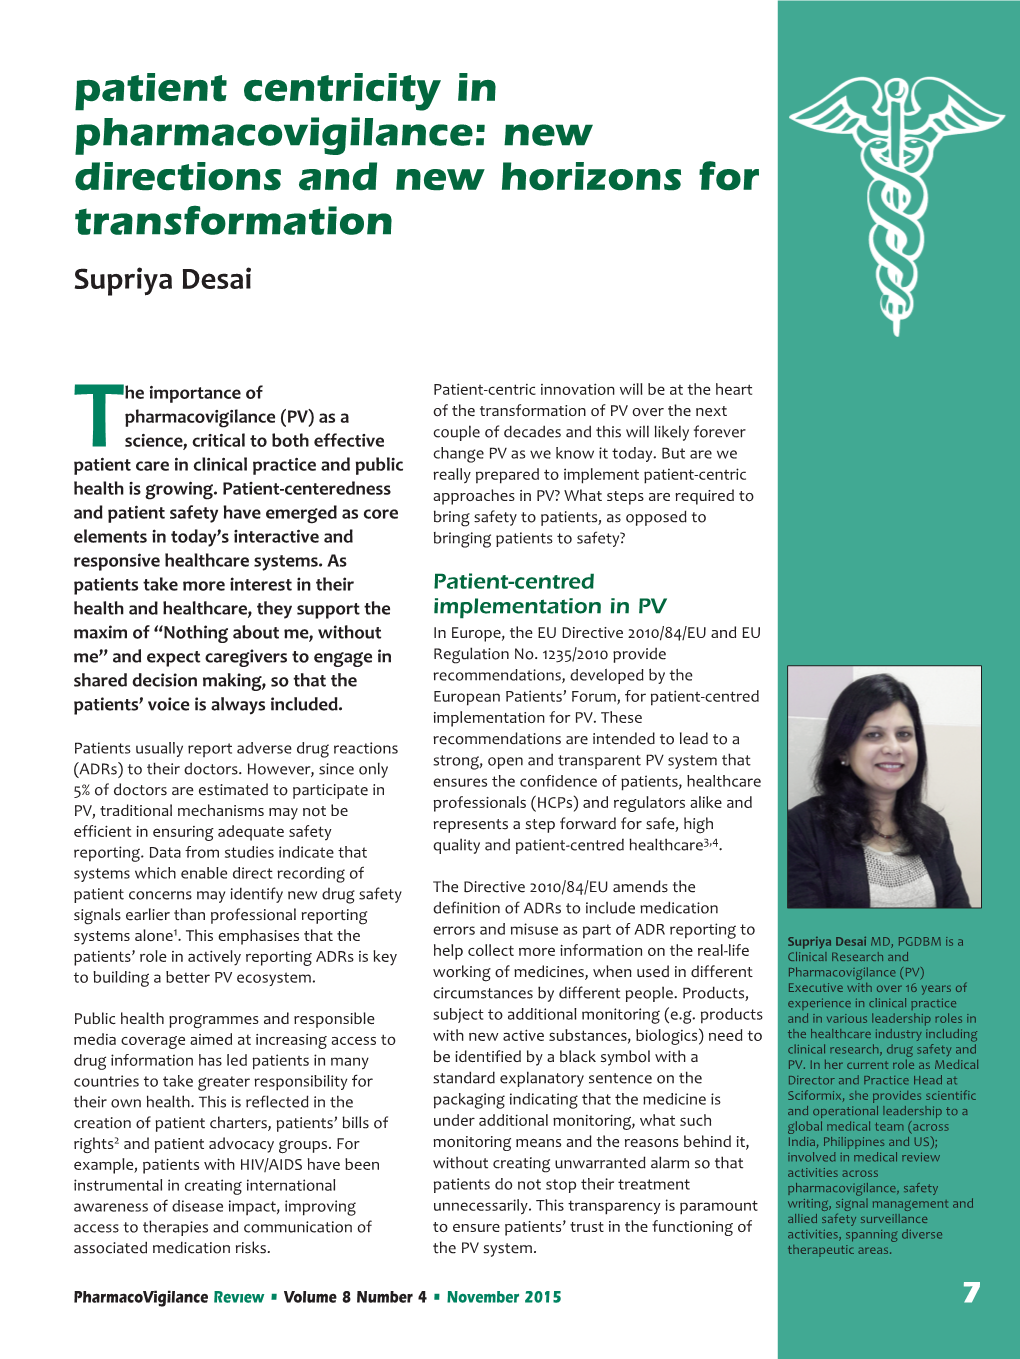 Patient Centricity in Pharmacovigilance: New Directions and New Horizons for Transformation